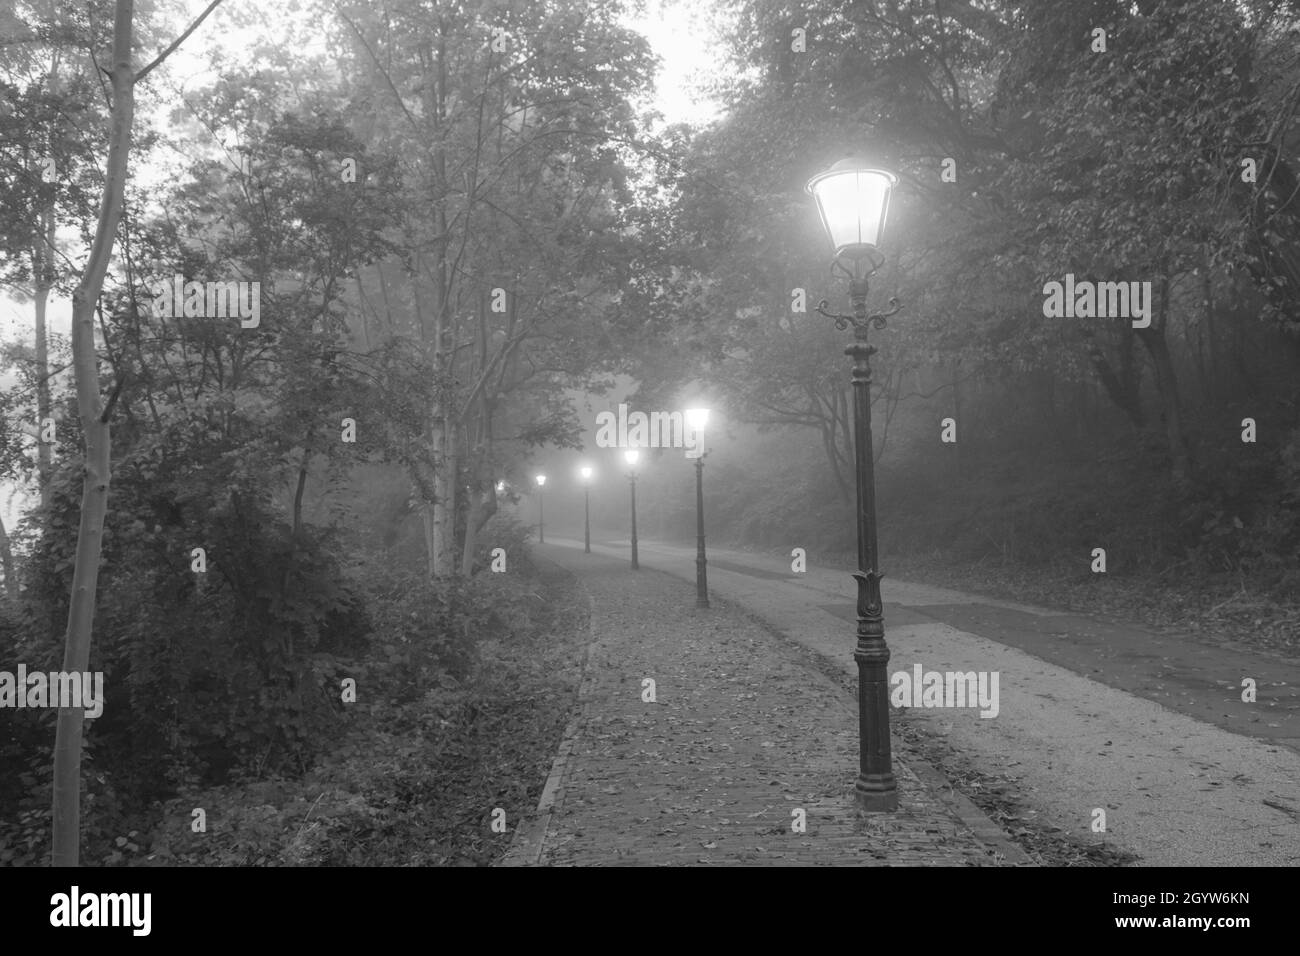 Road with classic street lamps in the mist Stock Photo